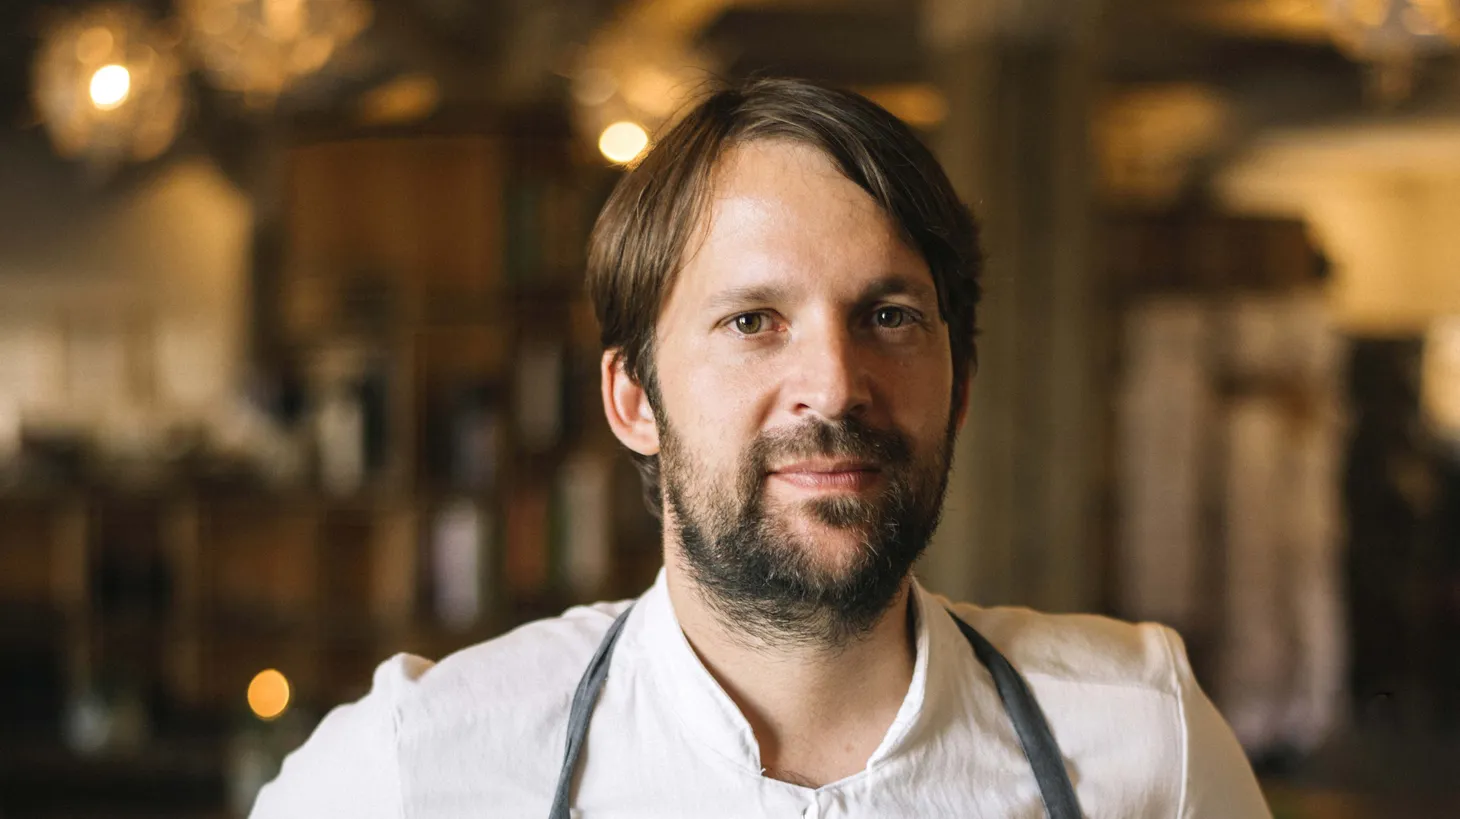 René Redzepi says, “It takes discipline to be curious,” and challenges his chefs with curiosity and a mantra of “one idea out, ten ideas in.”